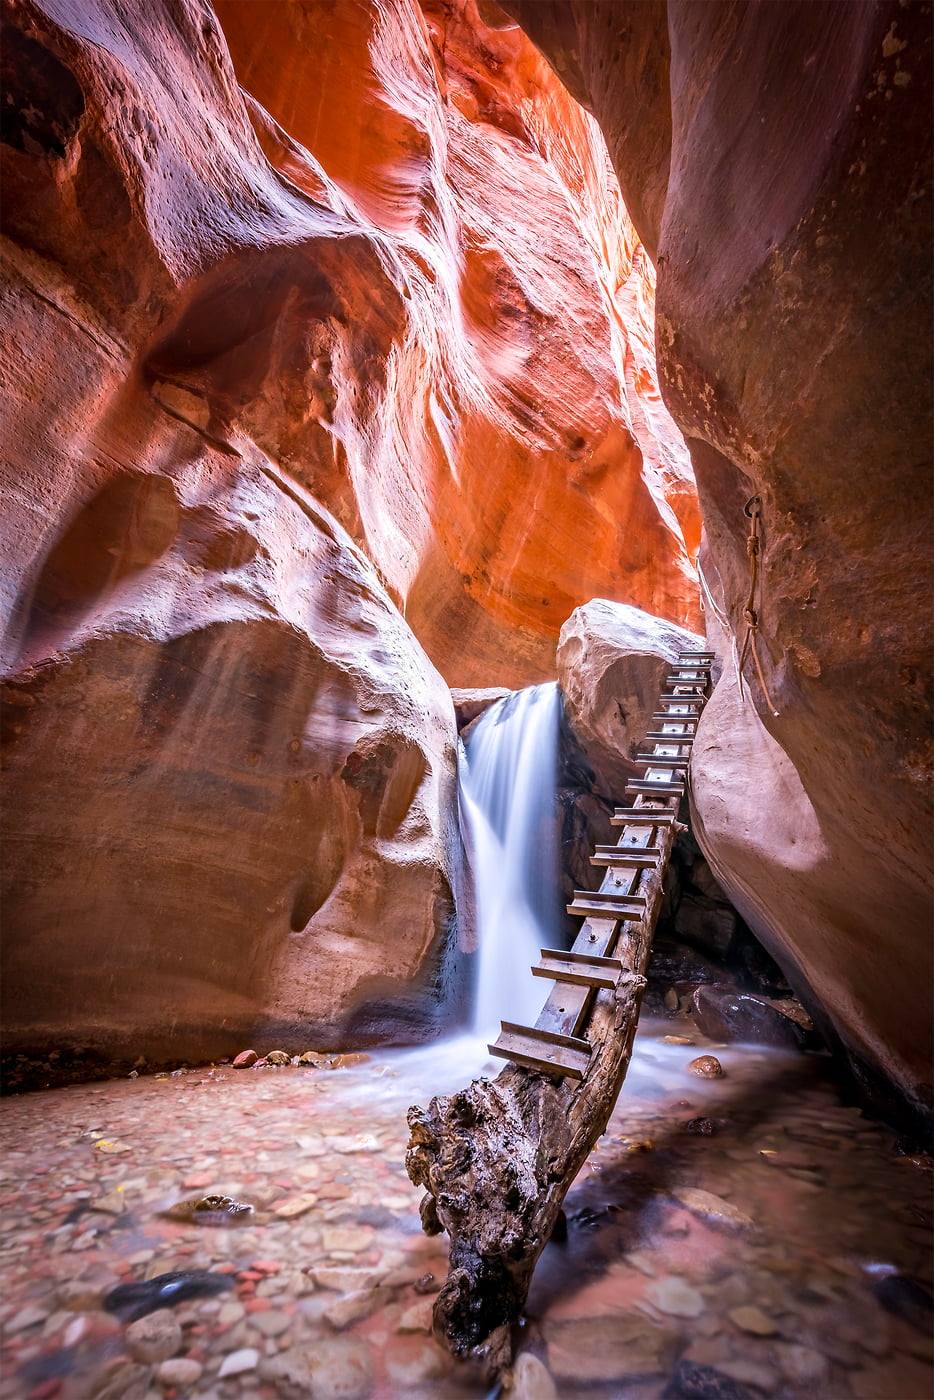 200 megapixels! A very high resolution, large-format VAST photo print of a waterfall, canyon, and ladder in Zion National Park; photo created by Justin Katz in Utah